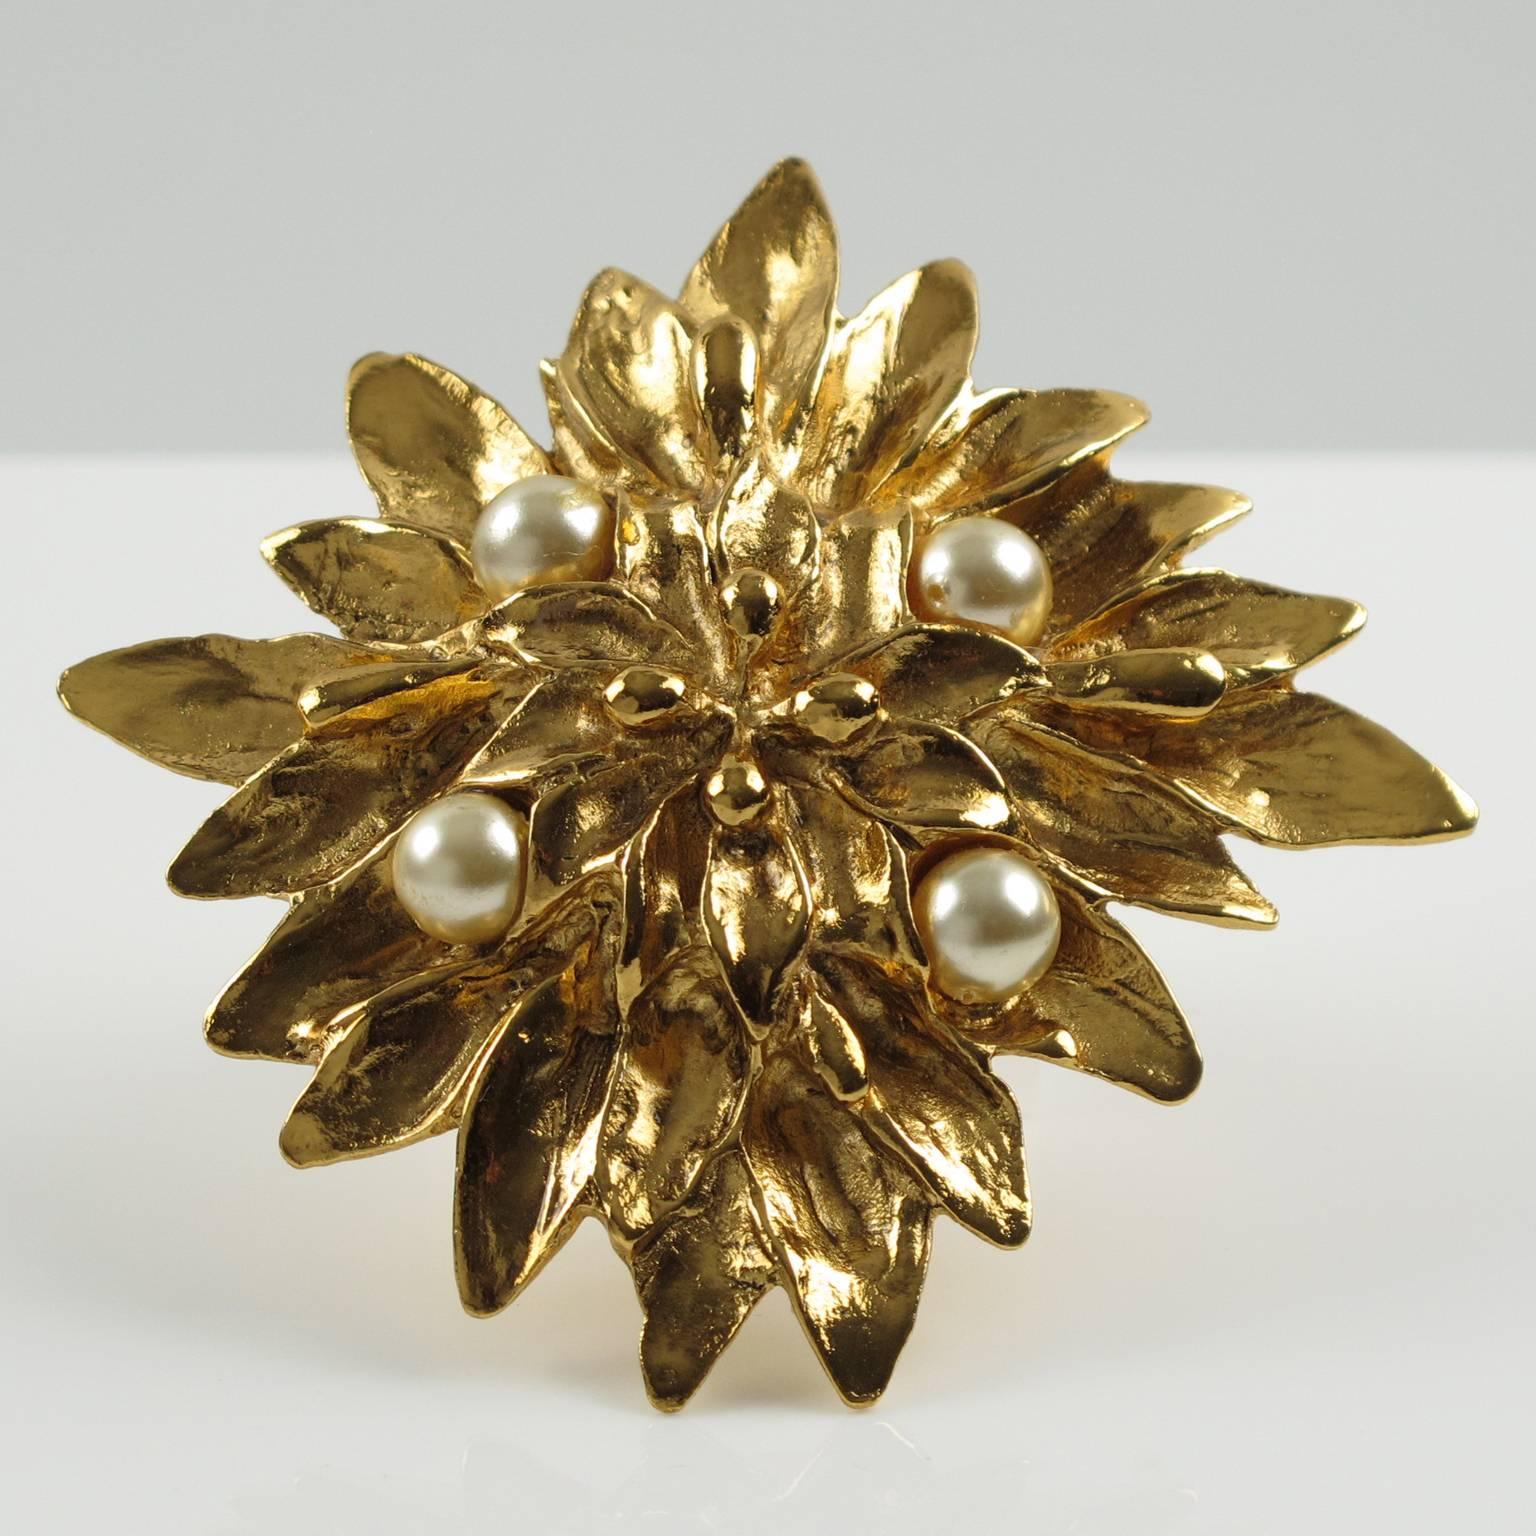 Vintage couture YVES SAINT LAURENT YSL Paris statement Pin Brooch. Lovely gold plate massive round shape, metal all textured featuring a large dimensional flower, ornate with four simulated pearl. Excellent vintage condition. Signed at the back